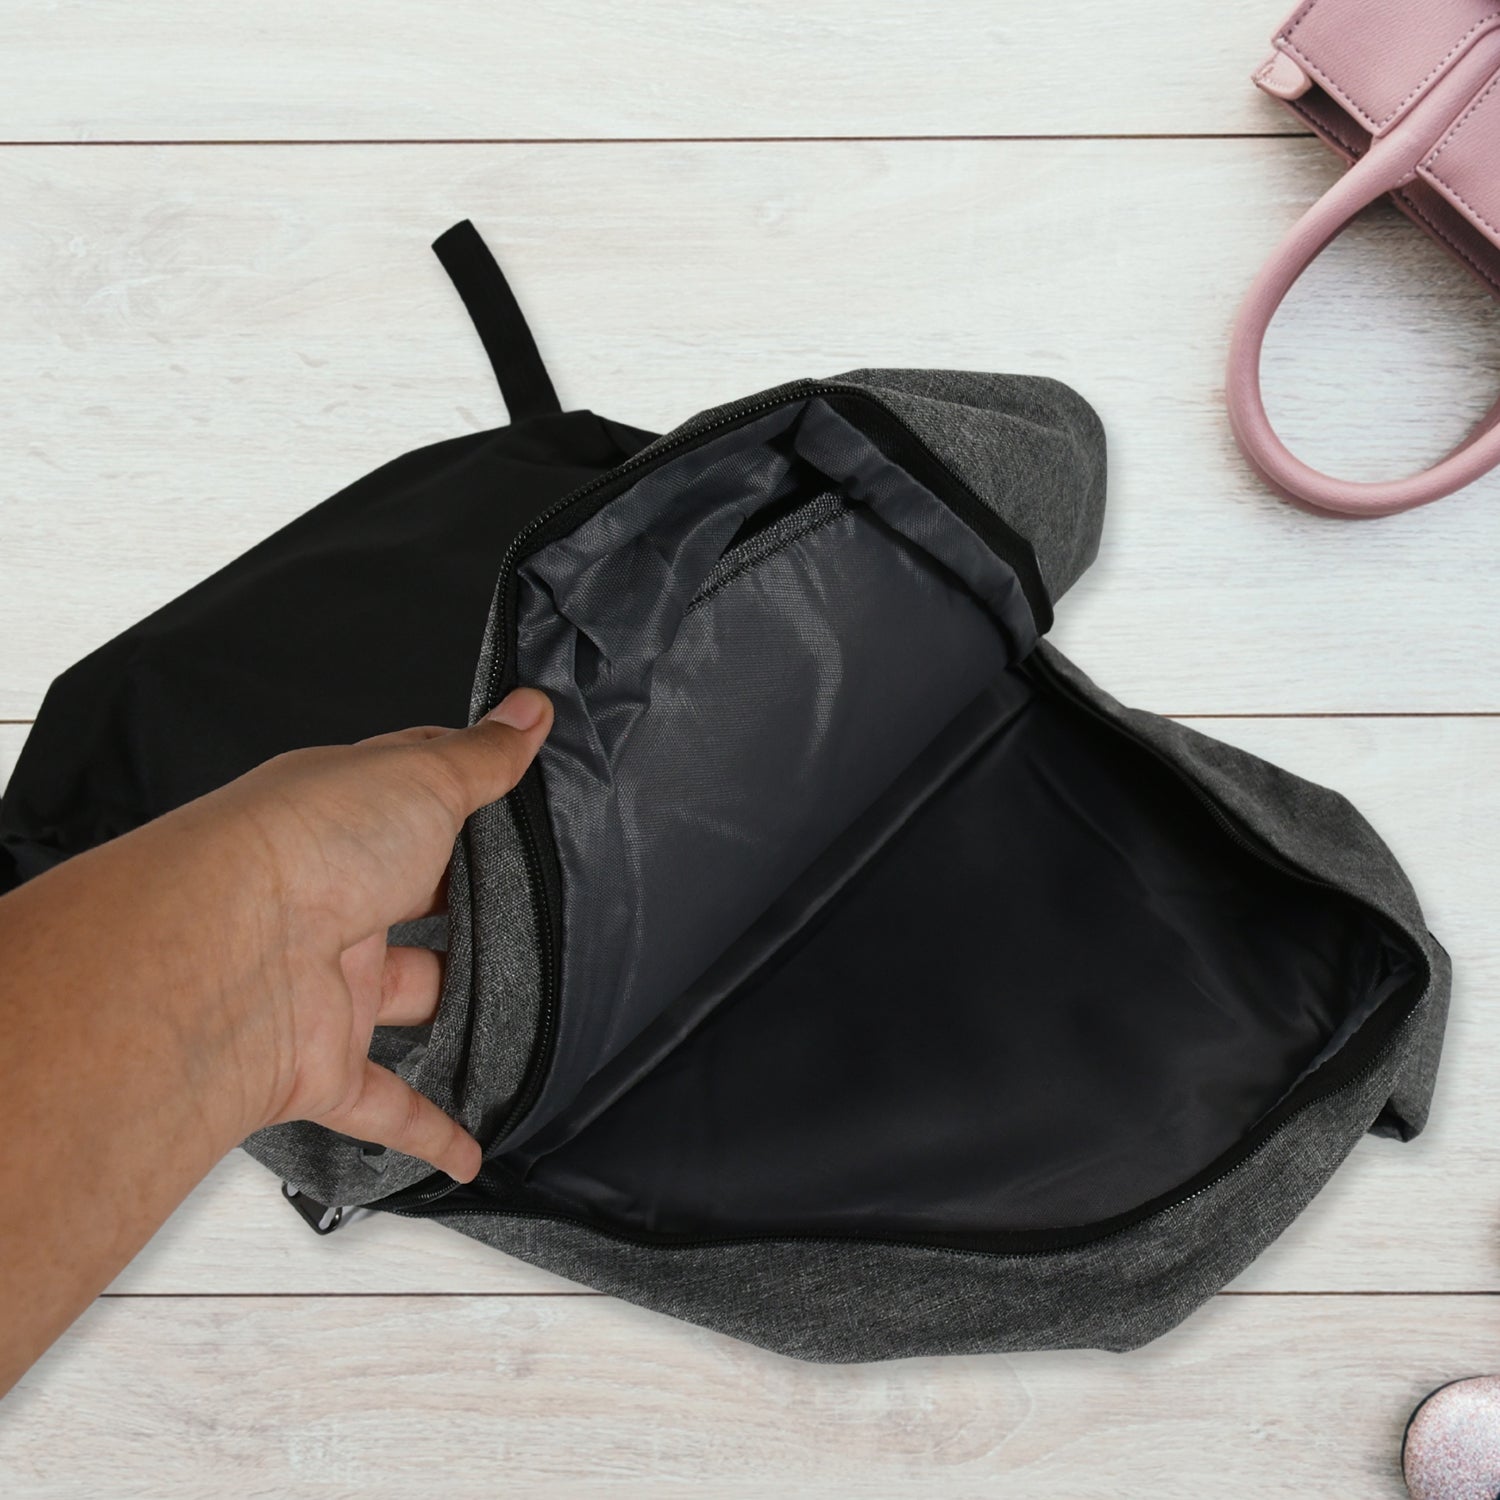 12826 USB Point Laptop Bag Used Widely In All Kinds Of Official Purposes As A Laptop Holder And Cover And Make's The Laptop Safe And Secure (1 pc)